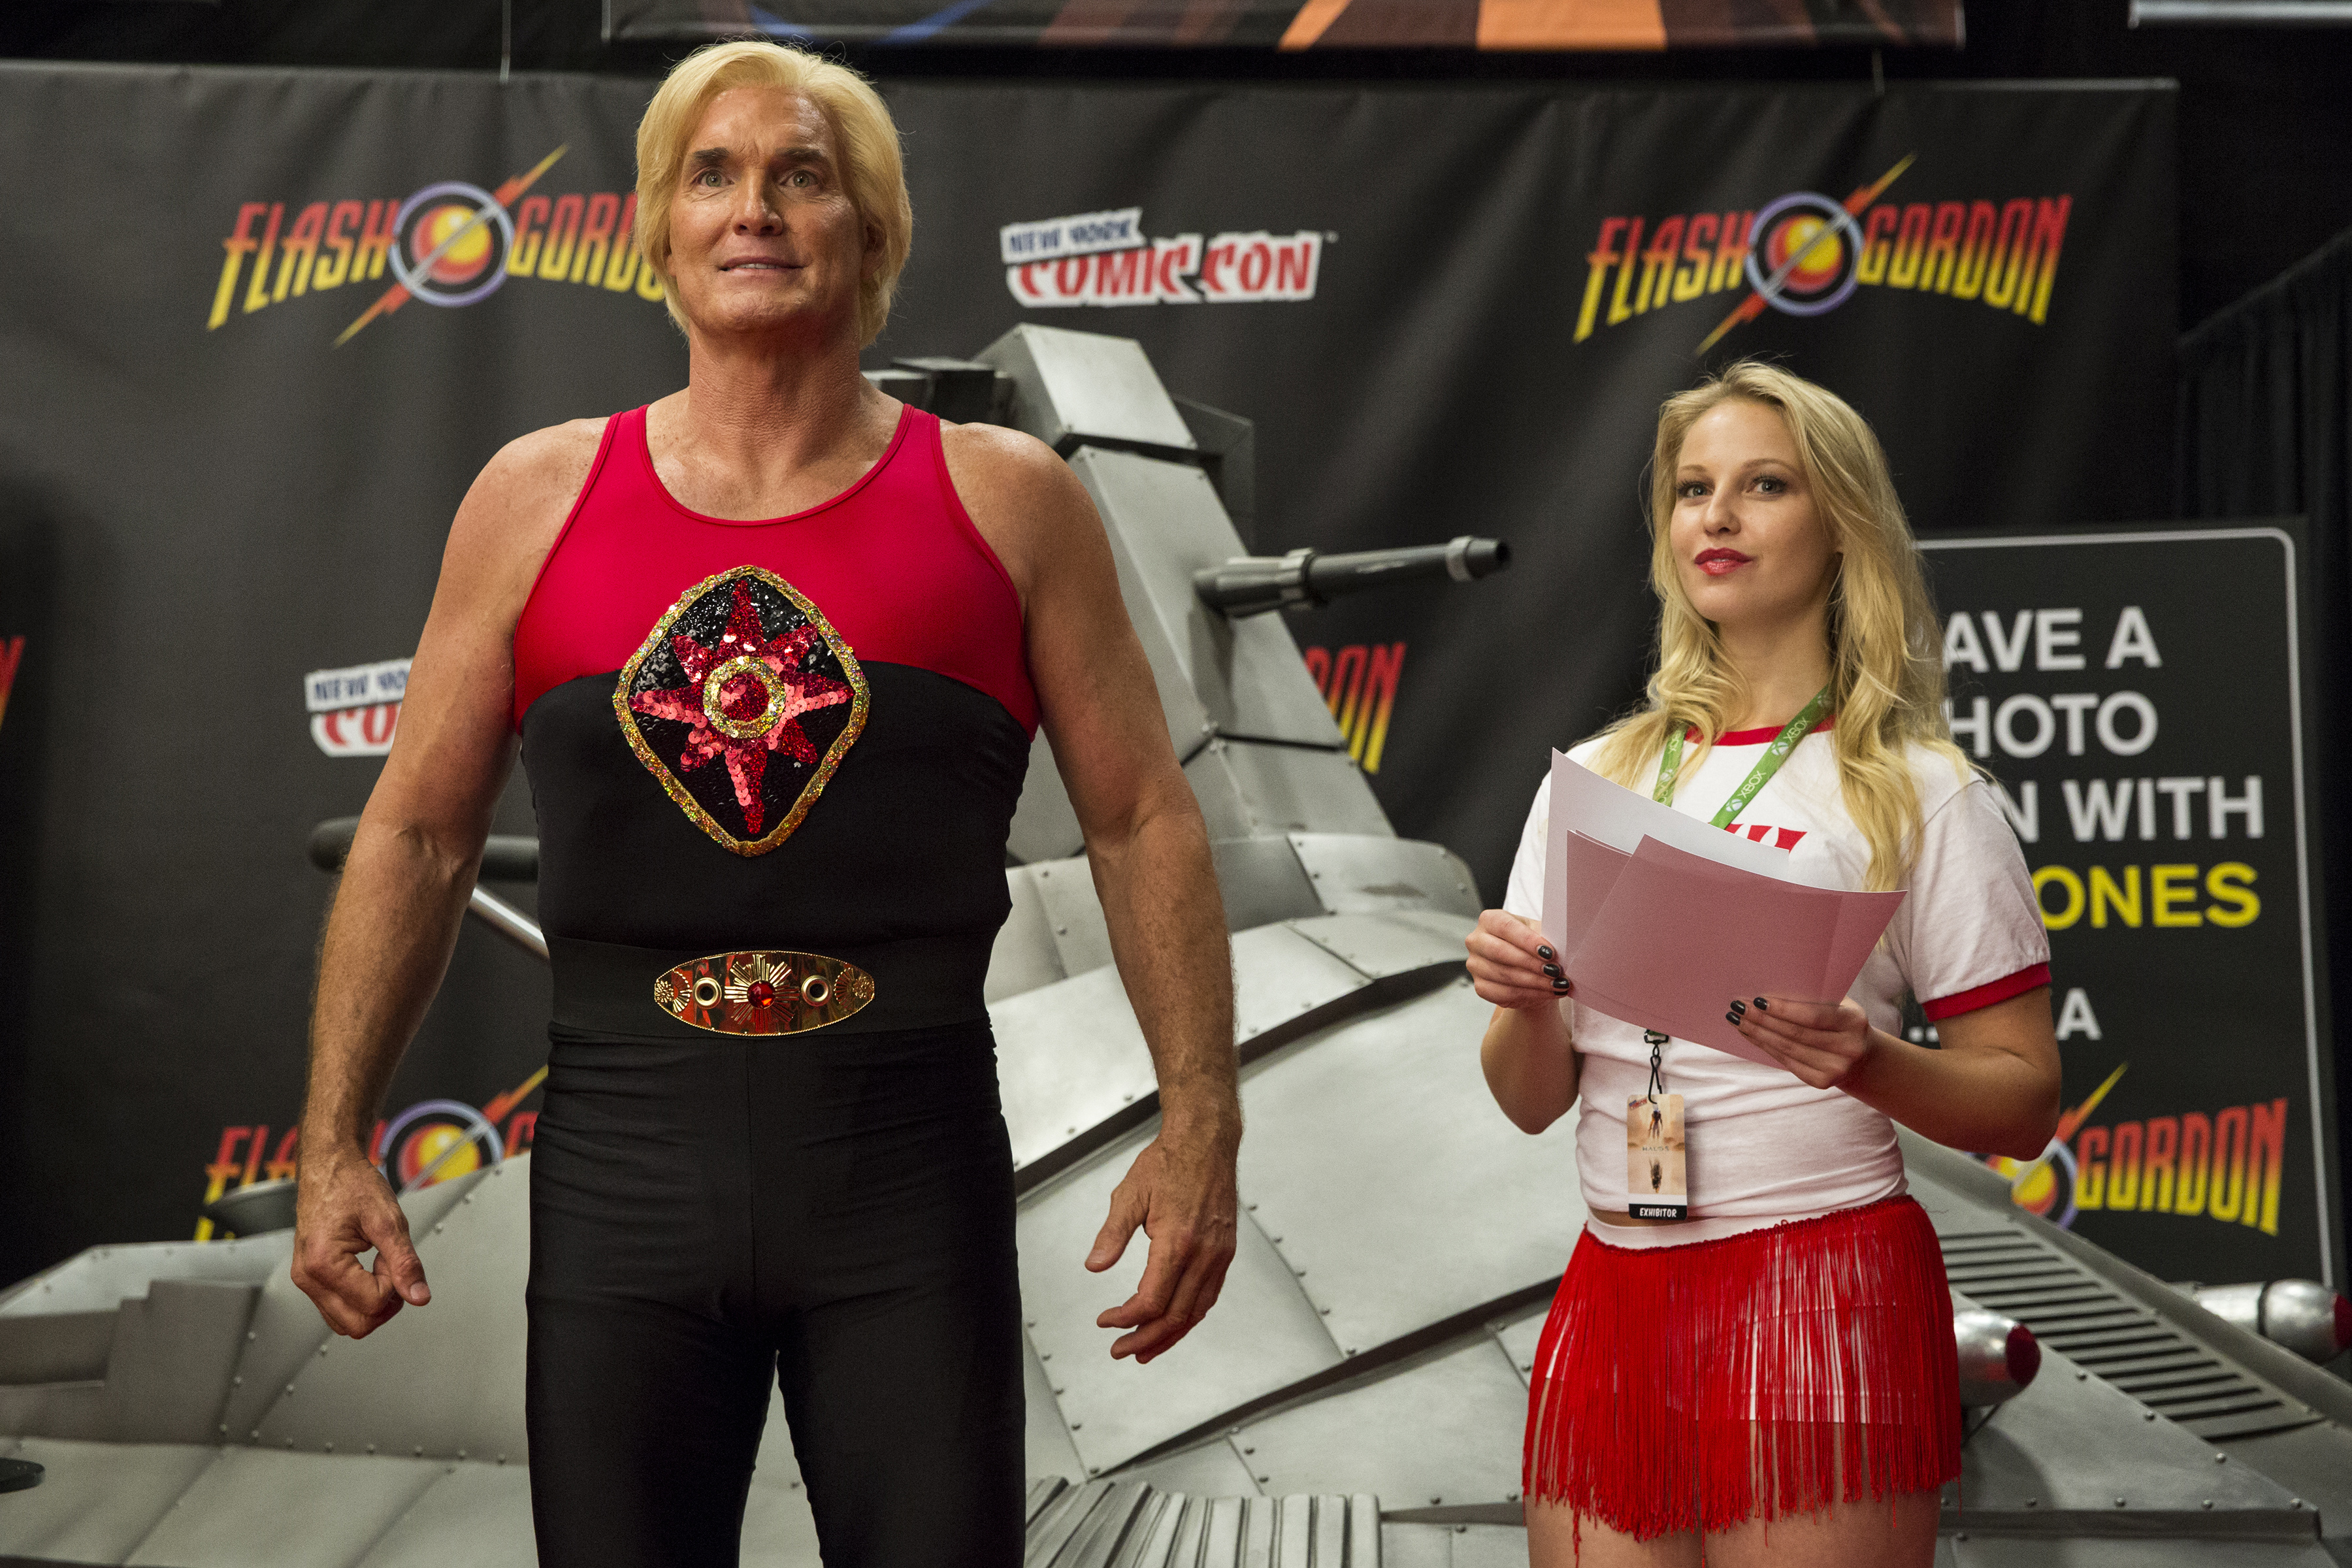 With Flash Gordon in Ted 2